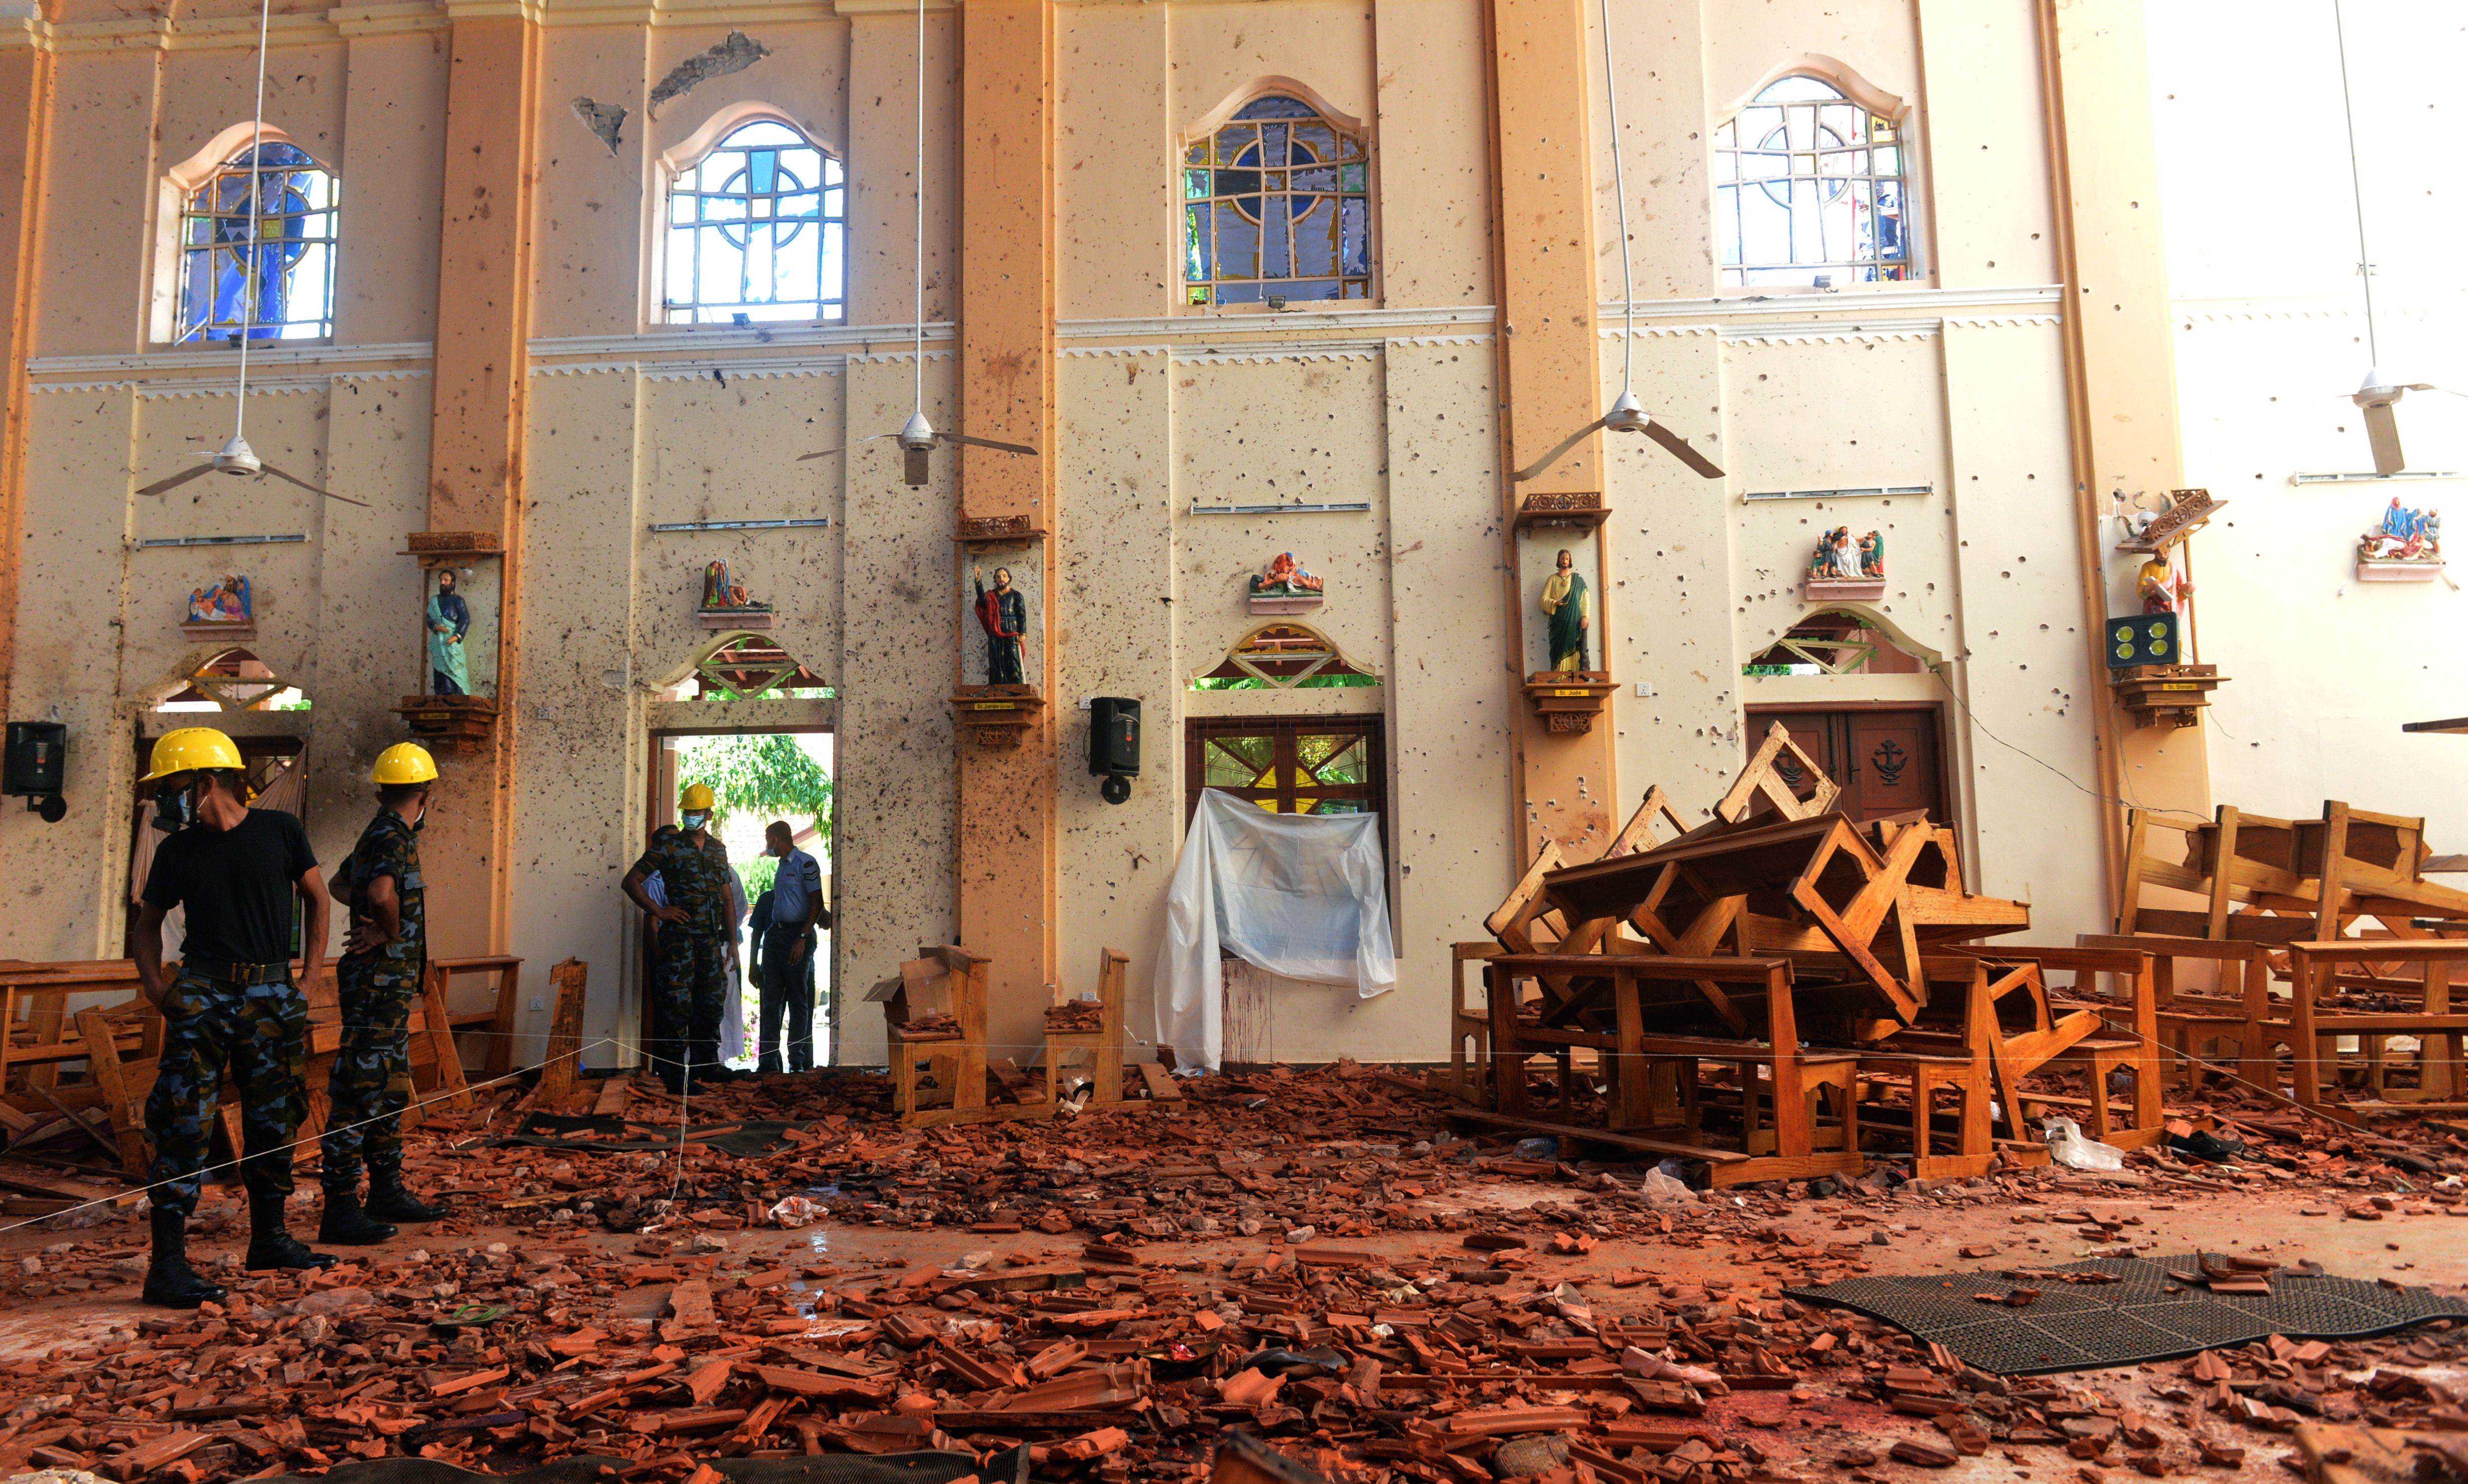 Security personnel inspect the interior of St. Sebastian's Church in Negombo on April 22, 2019, a day after the church was hit in series of bomb blasts targeting churches and luxury hotels in Sri Lanka. (ISHARA S. KODIKARA/AFP/Getty Images)